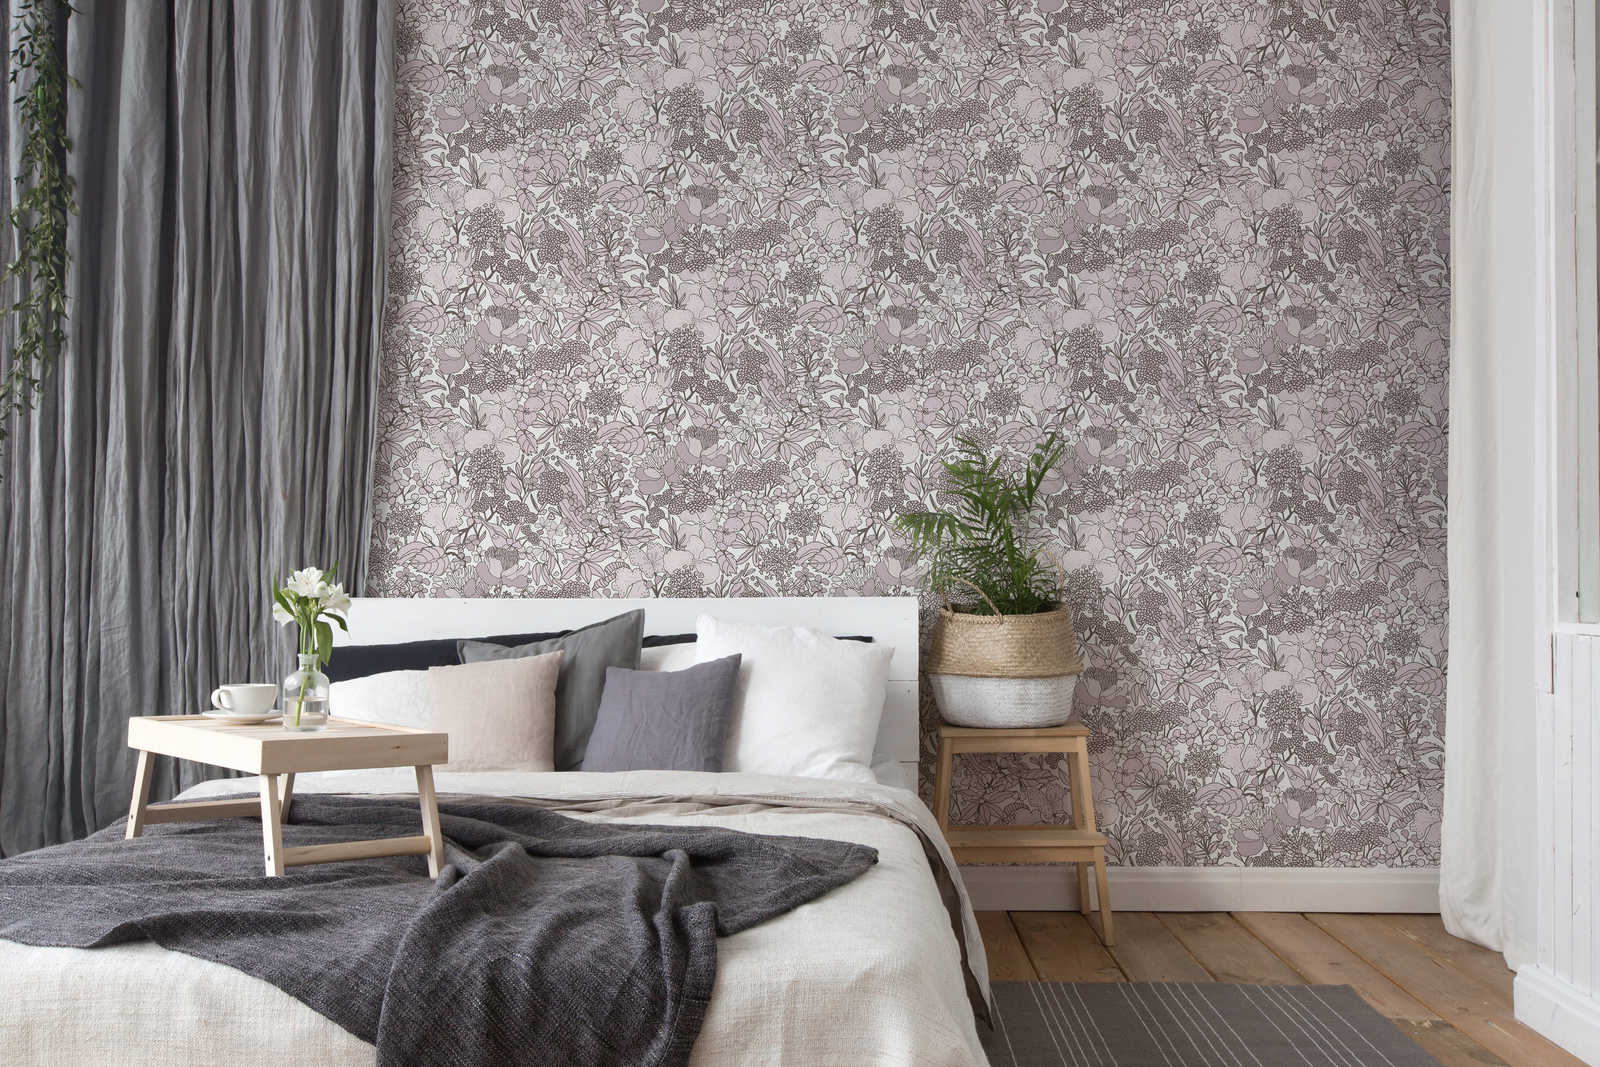             wallpaper grey beige floral pattern in drawing style - cream, brown, white
        